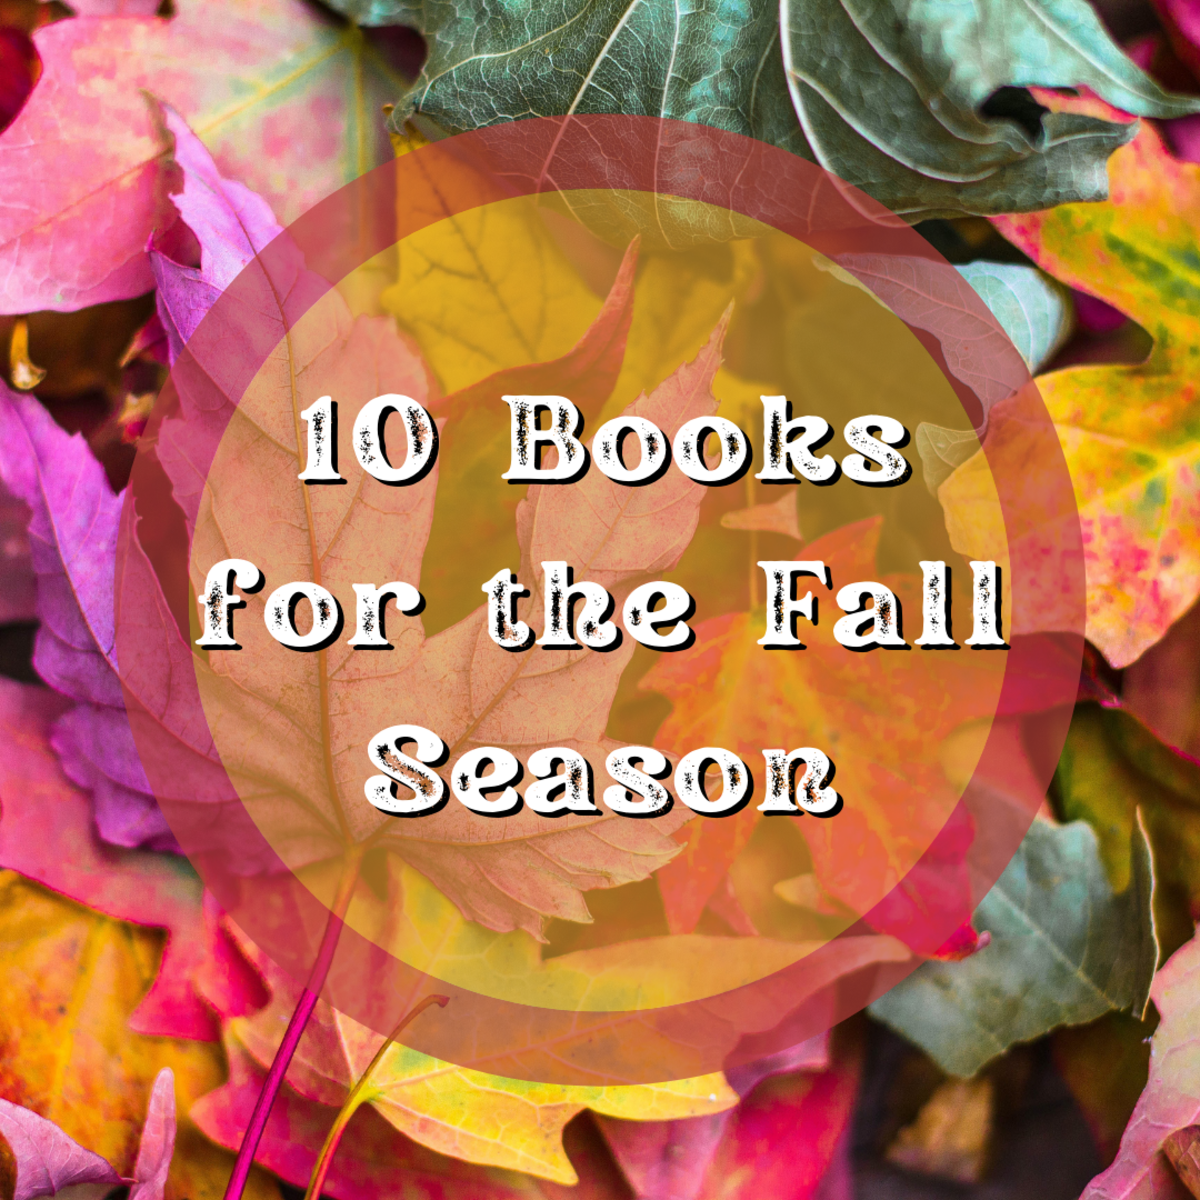 Read on to find 10 great spooky and eerie books to help you get into the fall mood!